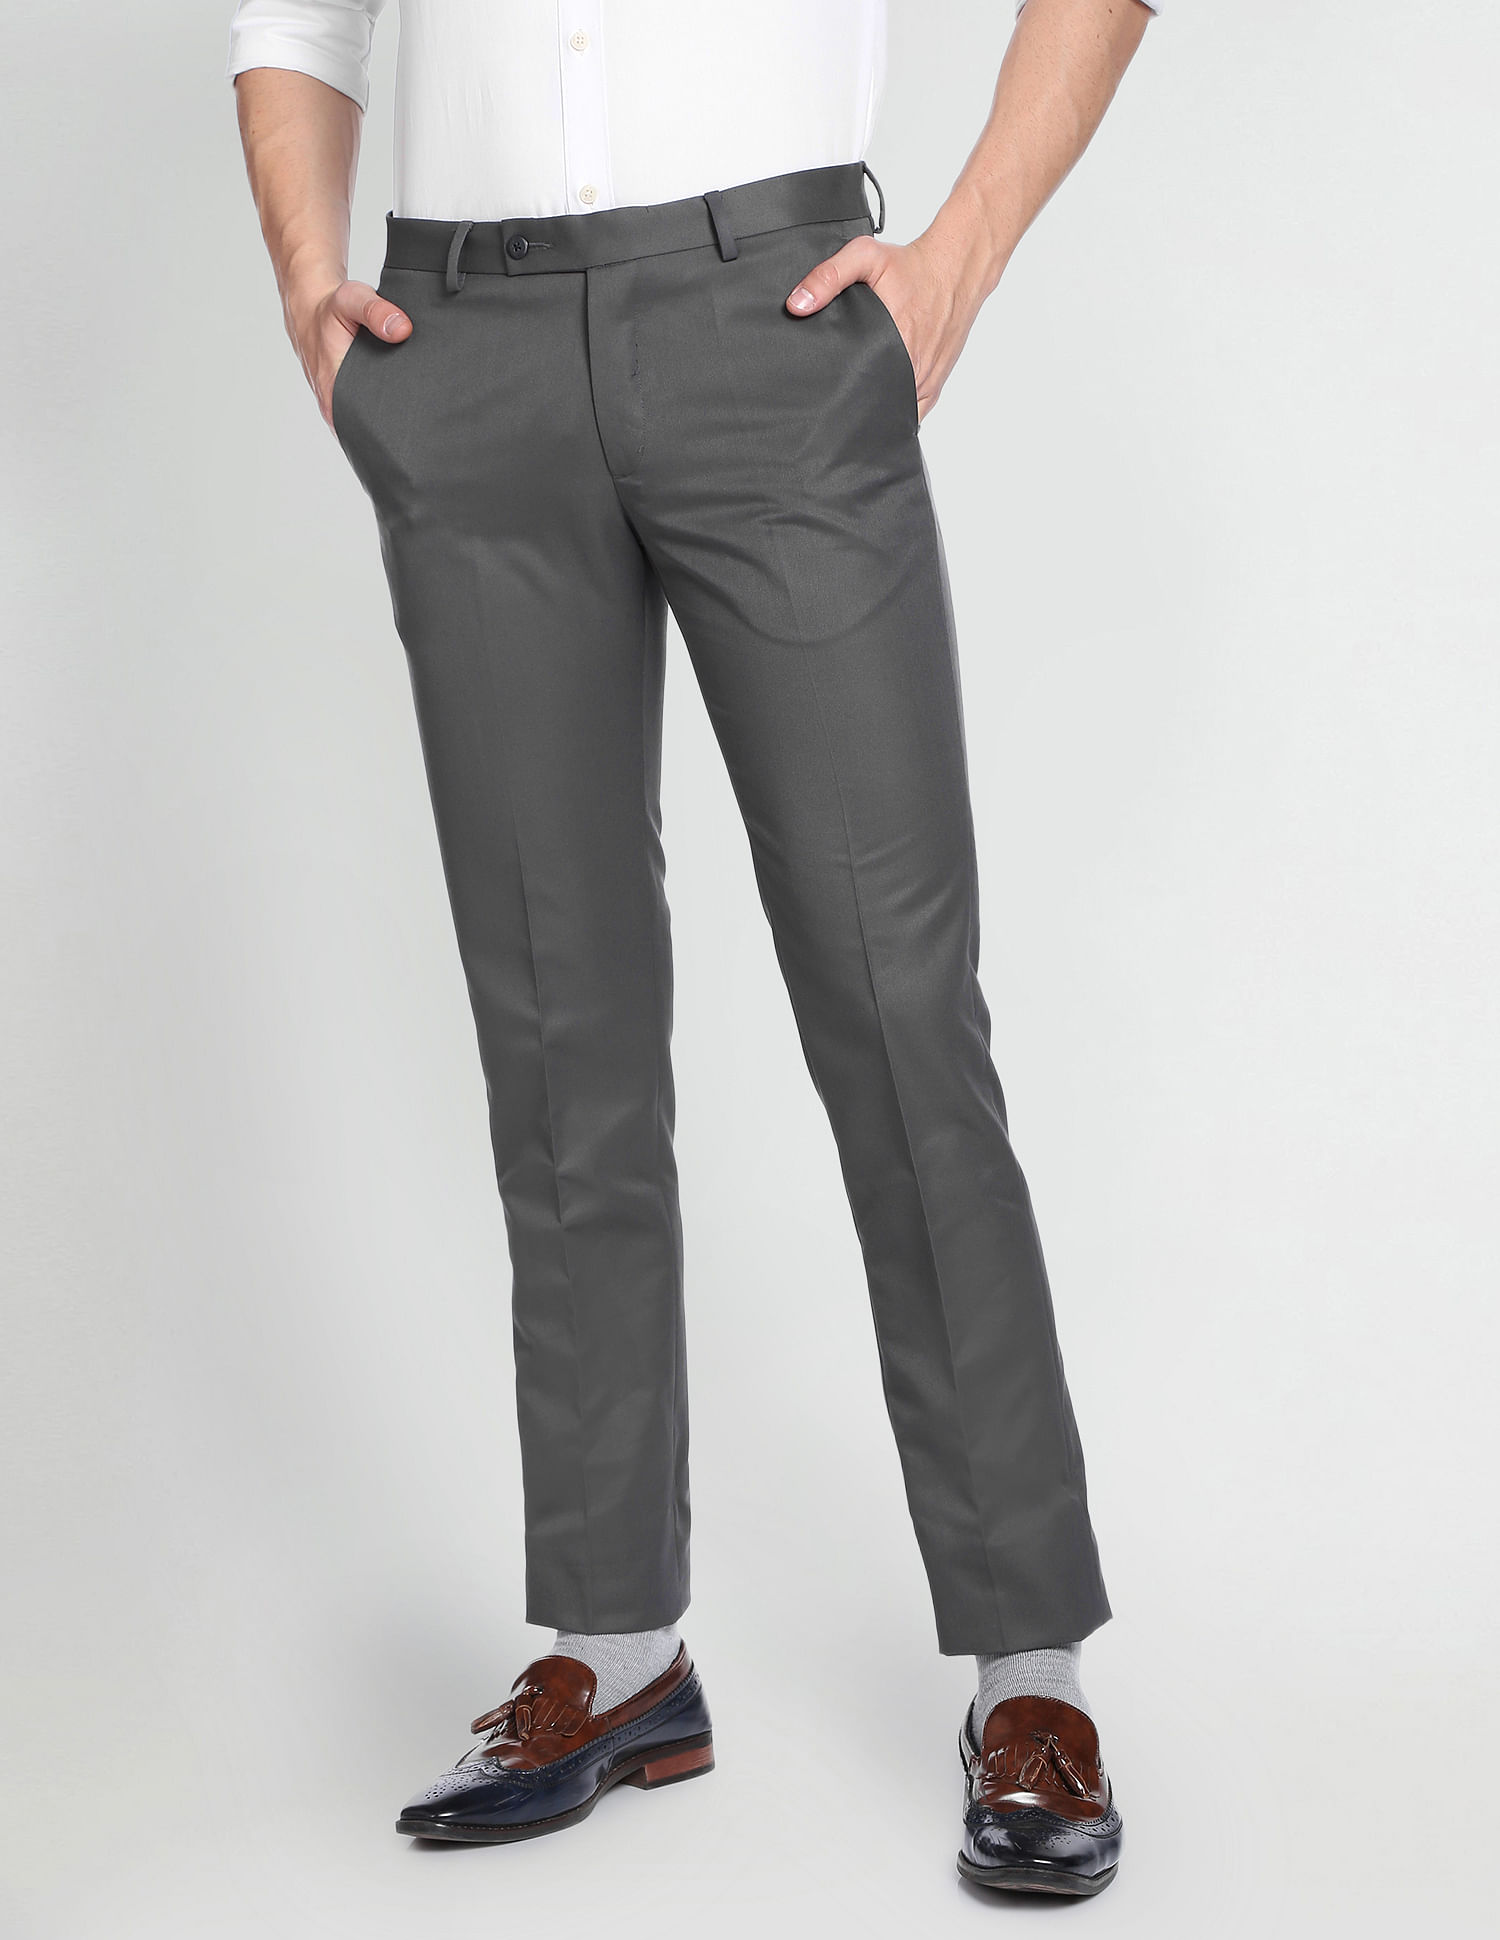 Buy White Formal Pants Online In India At Best Price Offers | Tata CLiQ